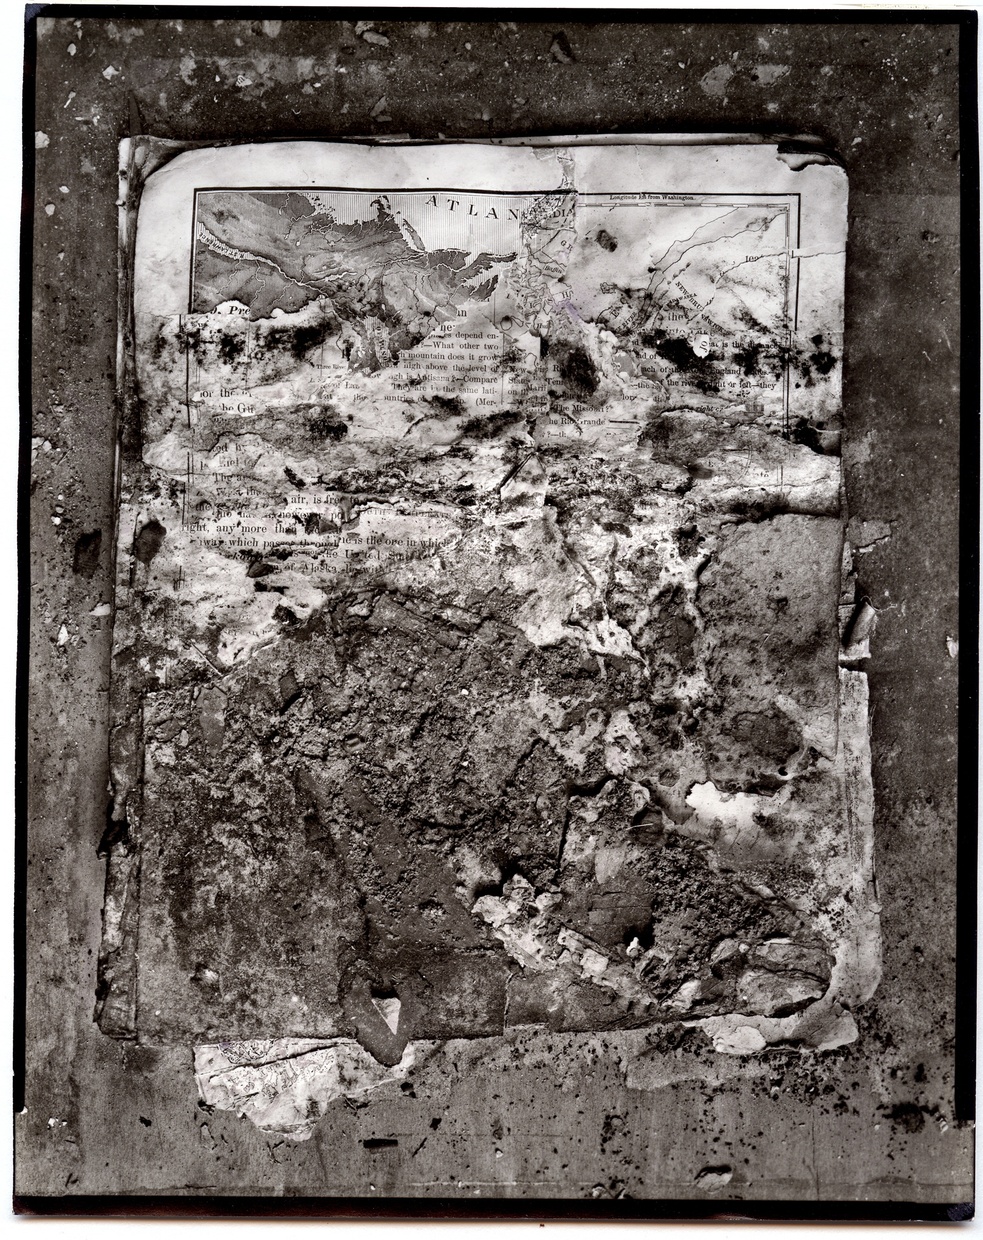 Black-and-white photograph of a stack of papers with text and a map visible, torn and covered with dirt and debris.